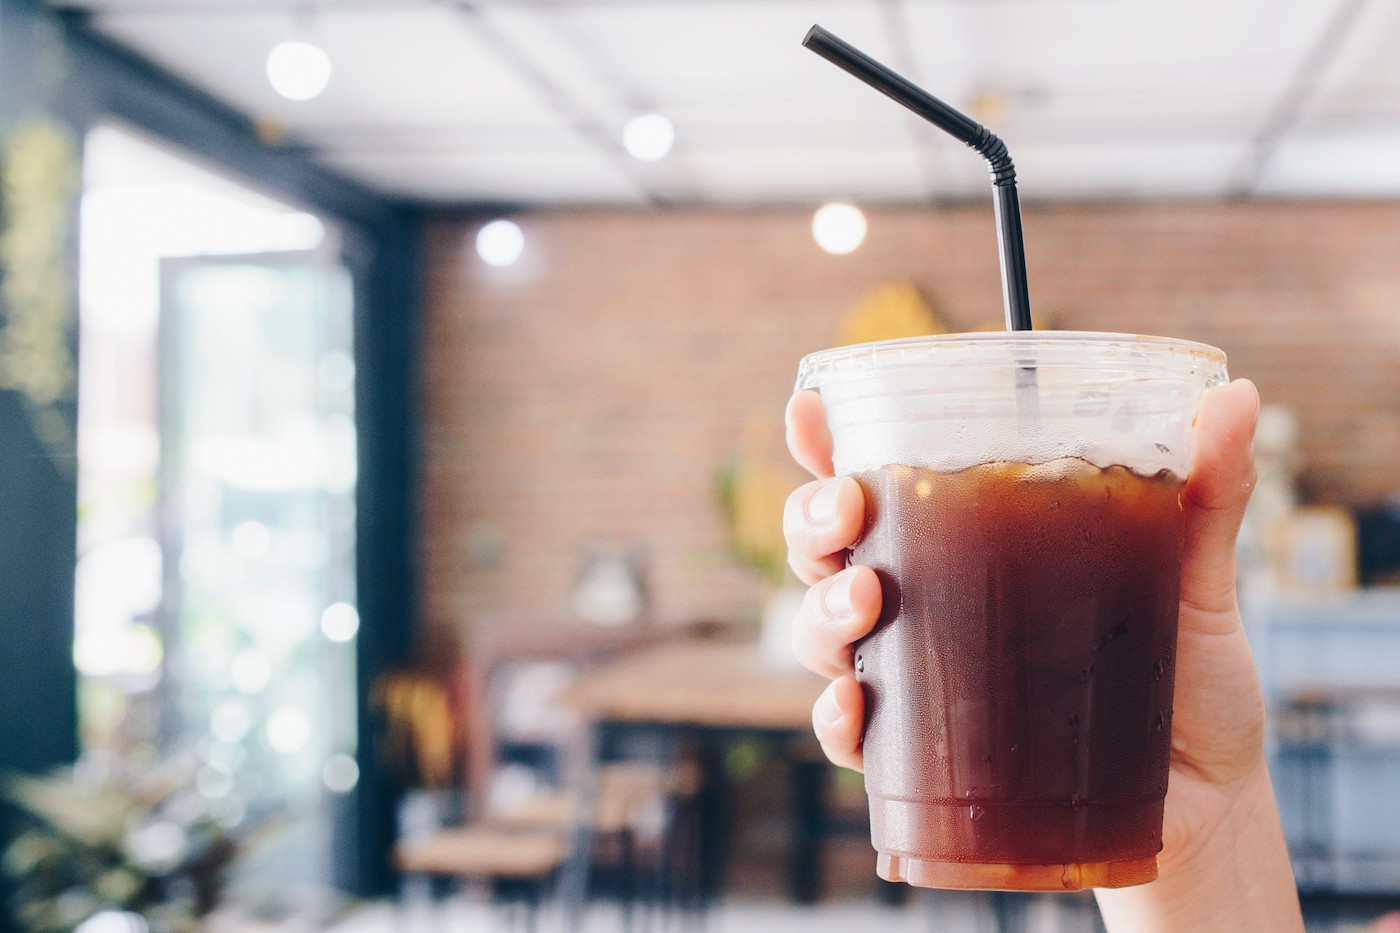 Cold Brew Vs Iced Coffee, What’s the Difference?